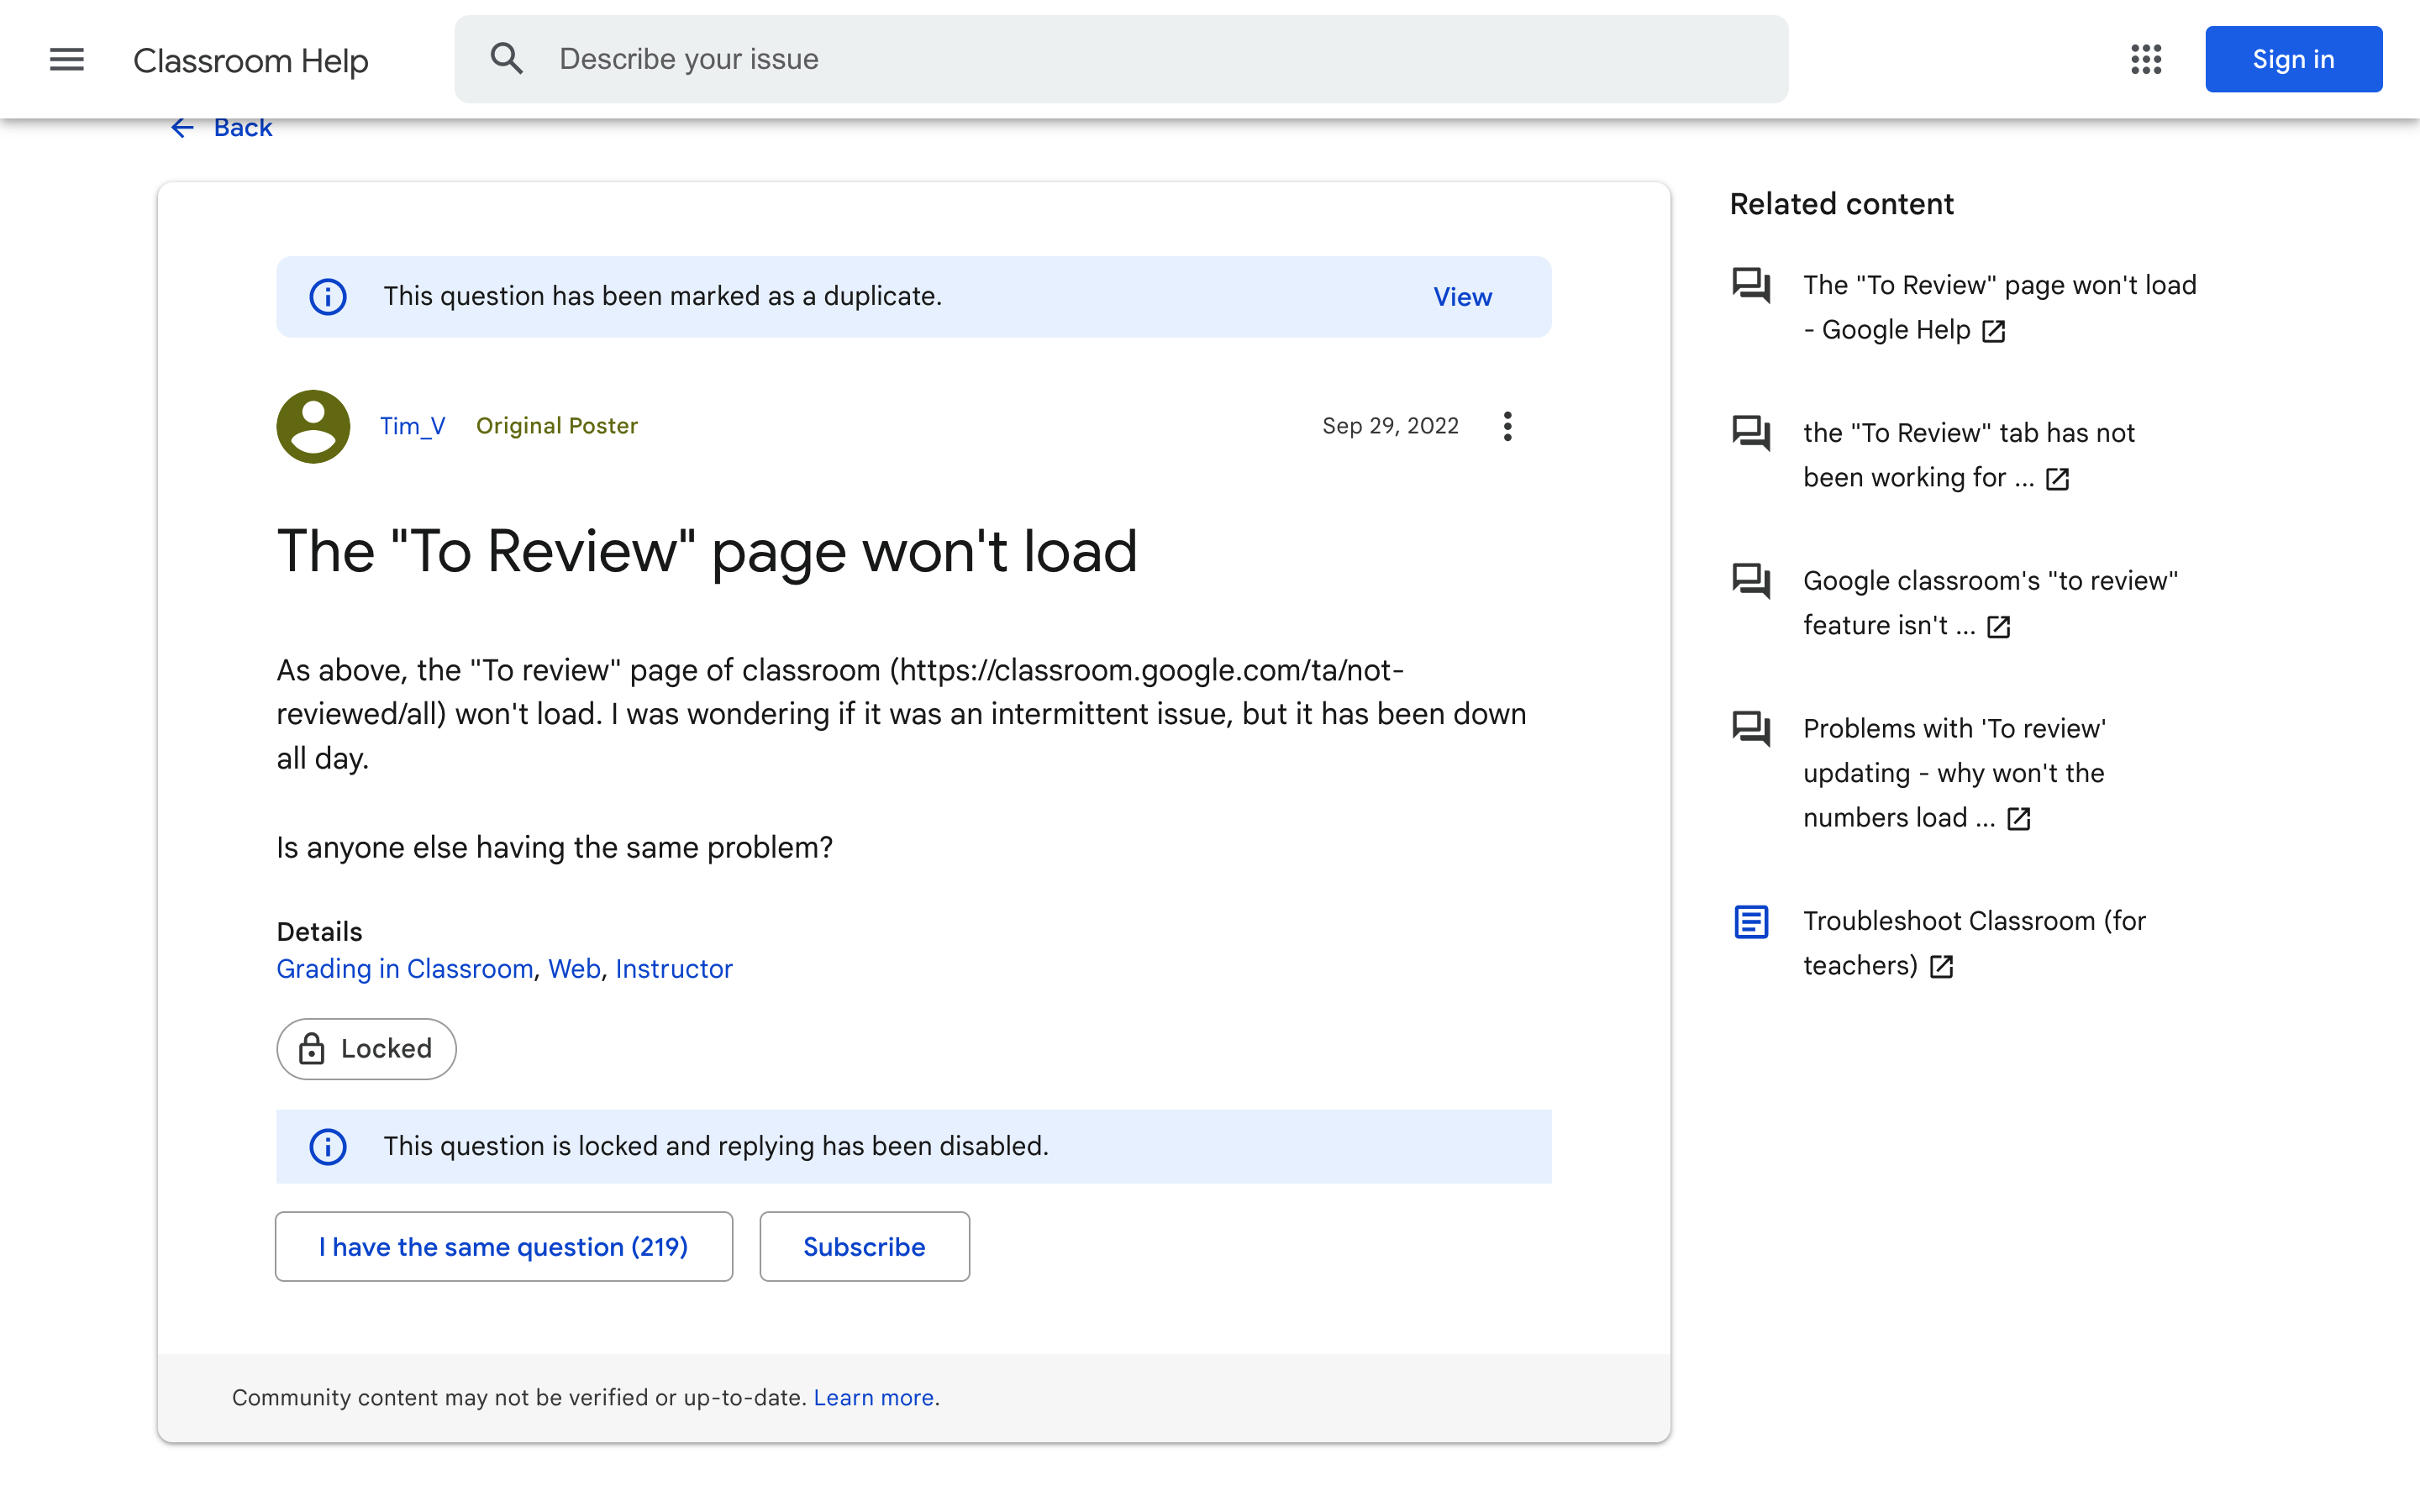 Google Classroom Help page with users reporting outage on September 29, 2022